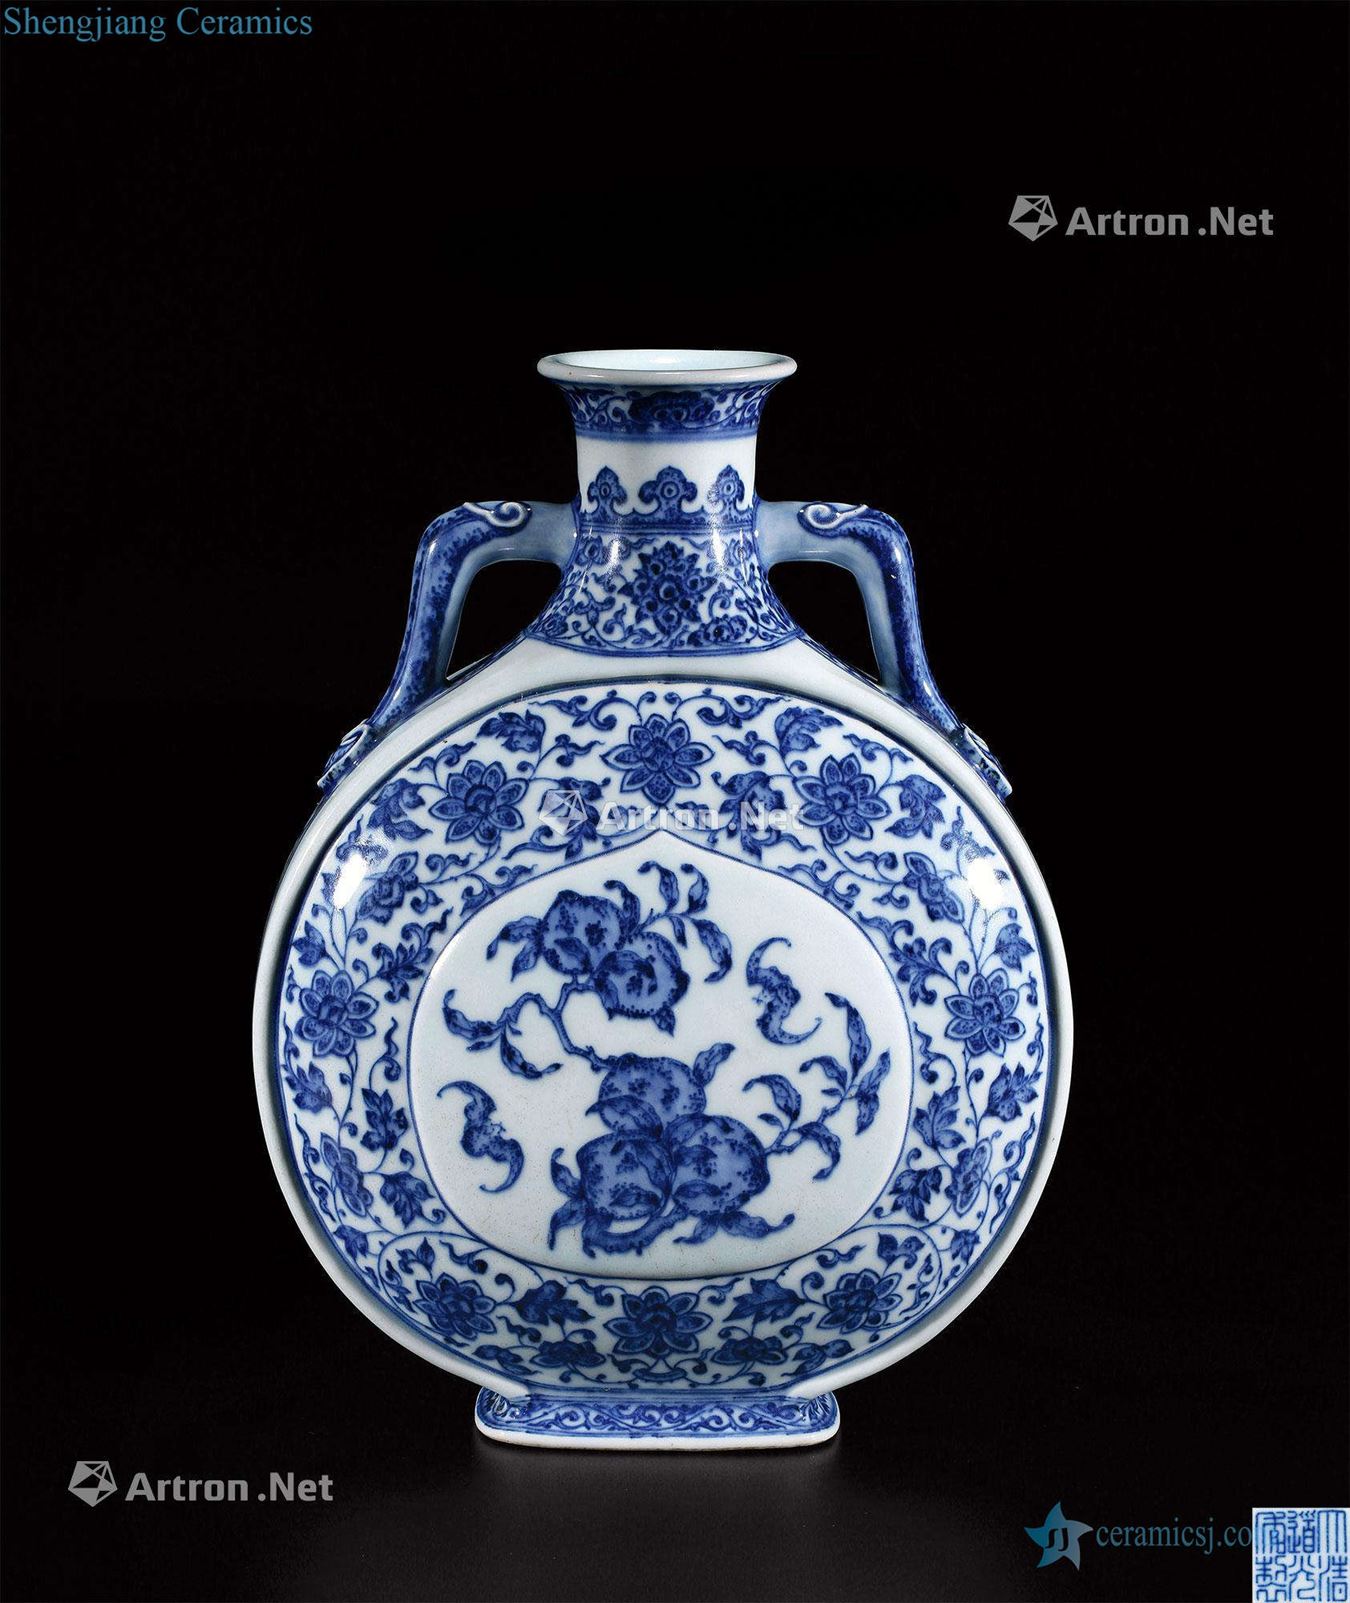 Qing daoguang Blue and white medallion flower tattoos on bottle